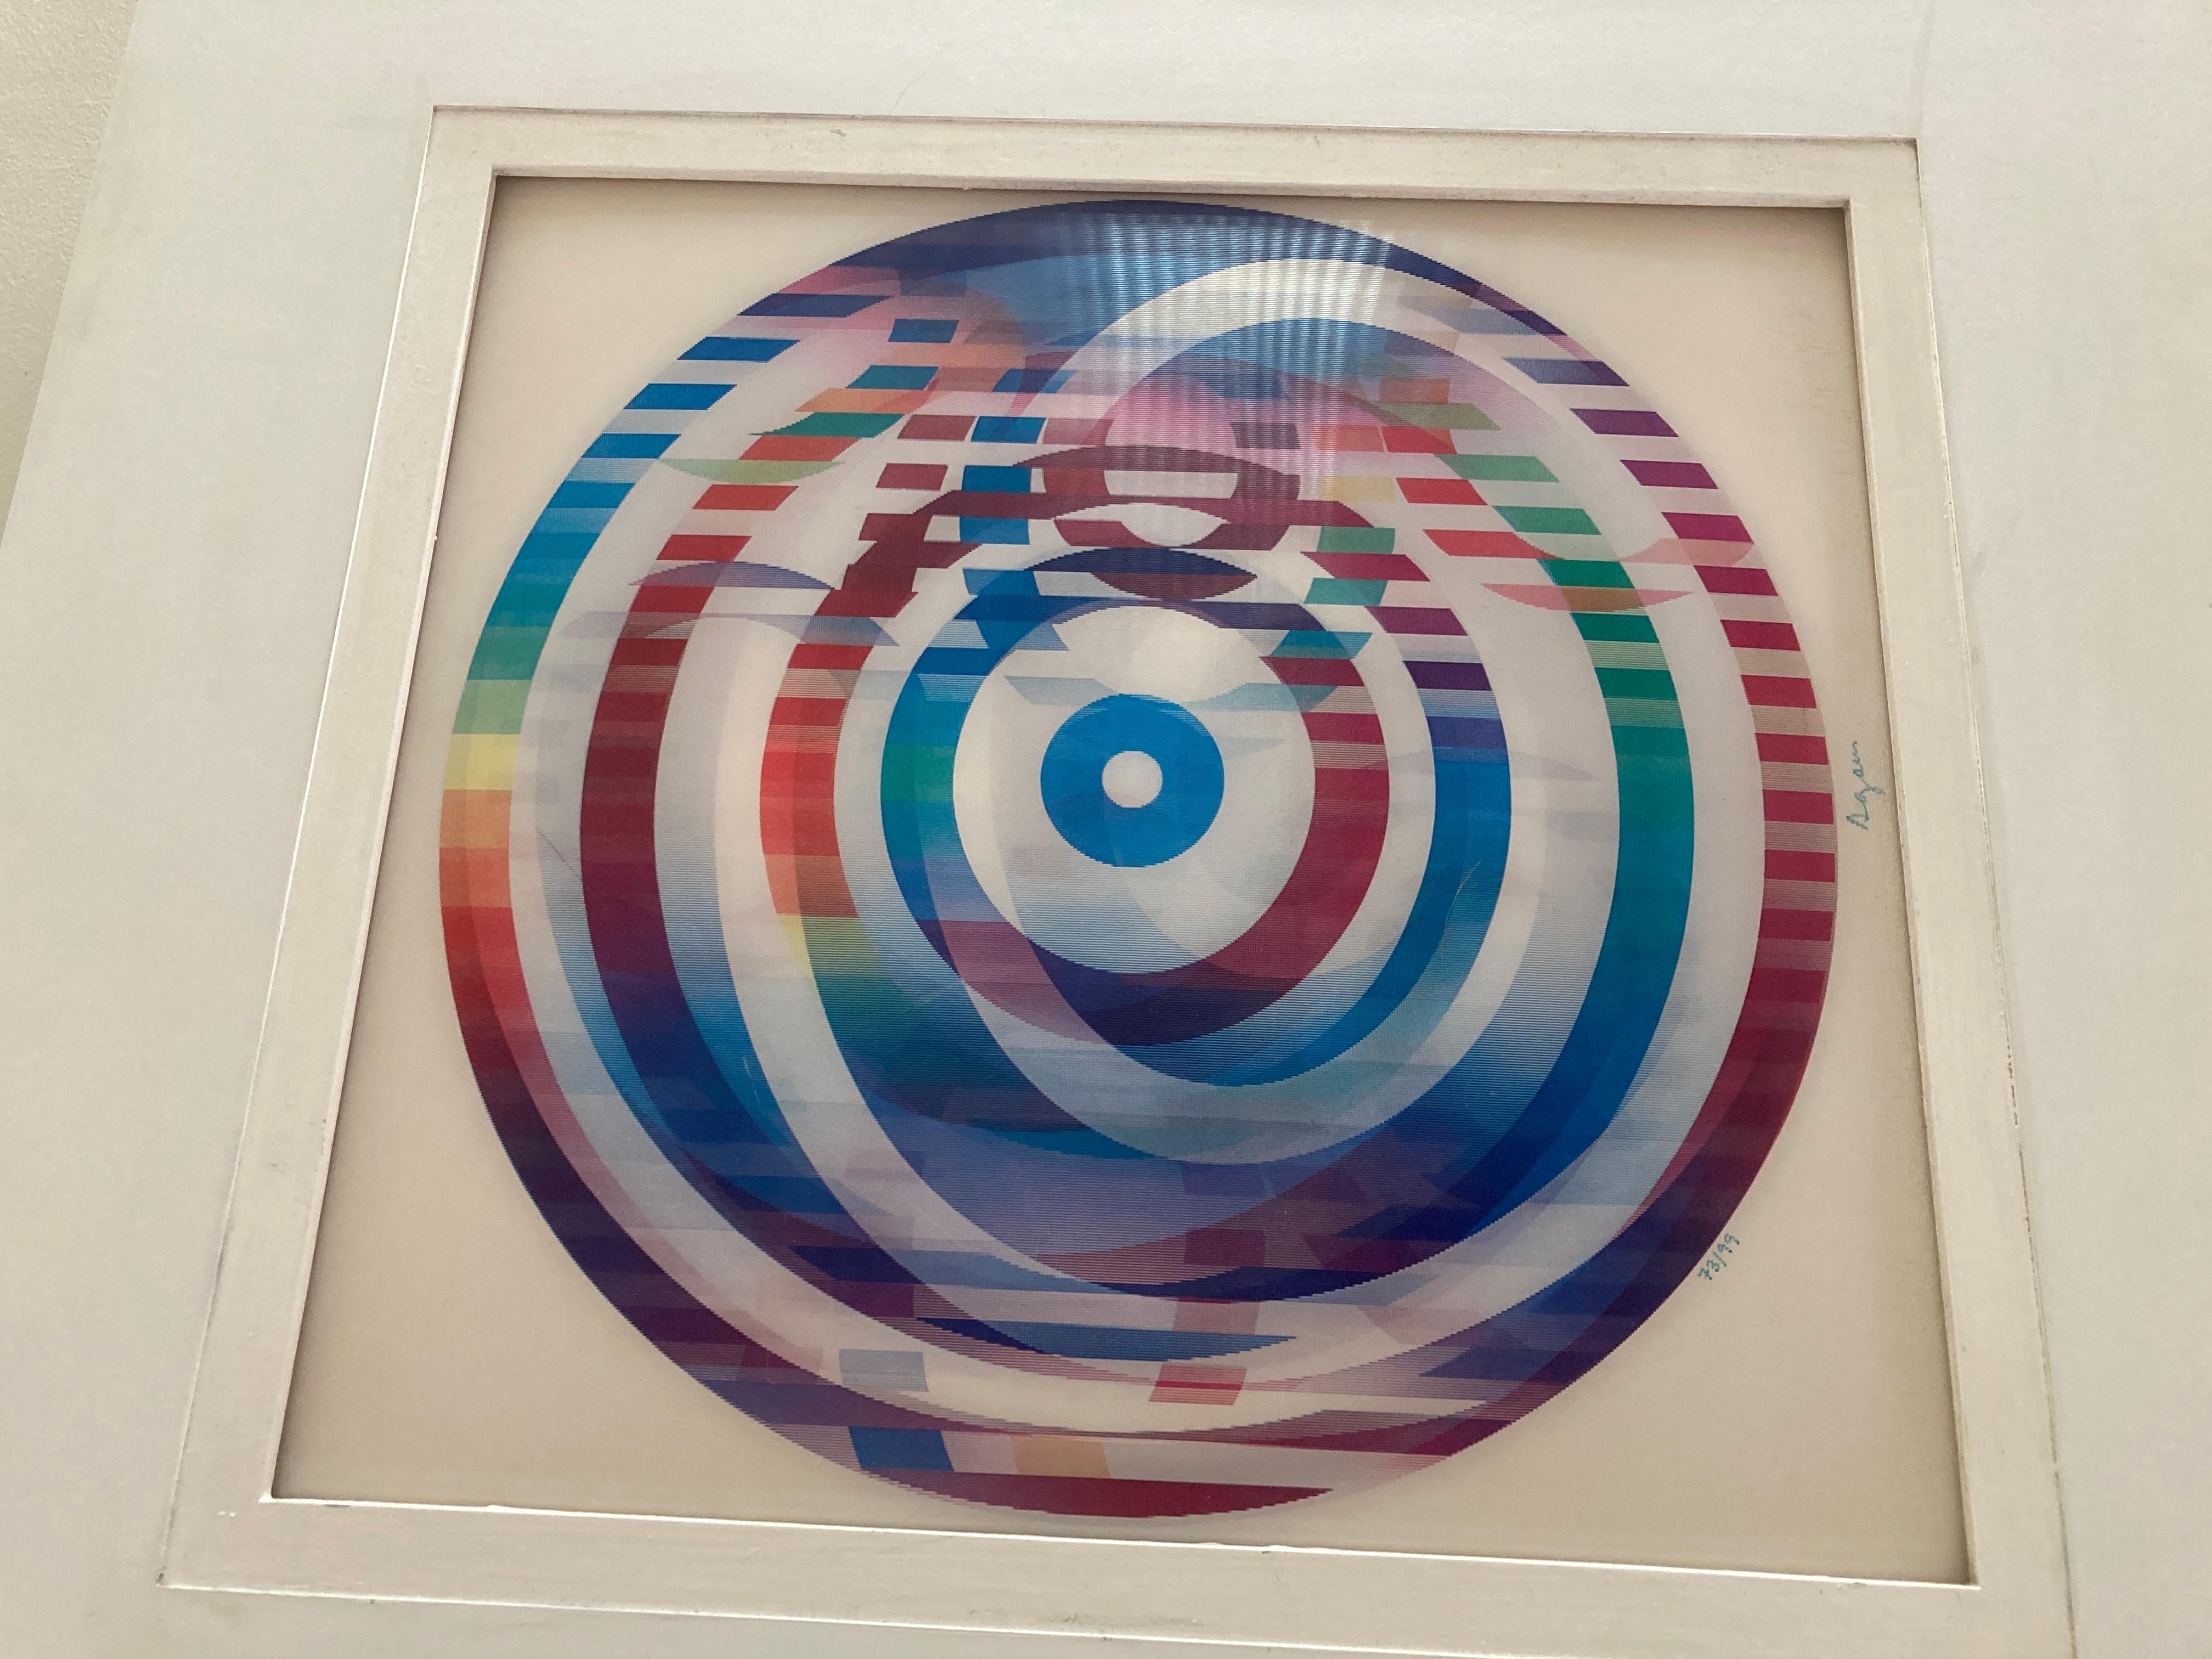 Yaacov Agam 'Image of the World' Signed, Limited Edition Lenticular Agamograph 6